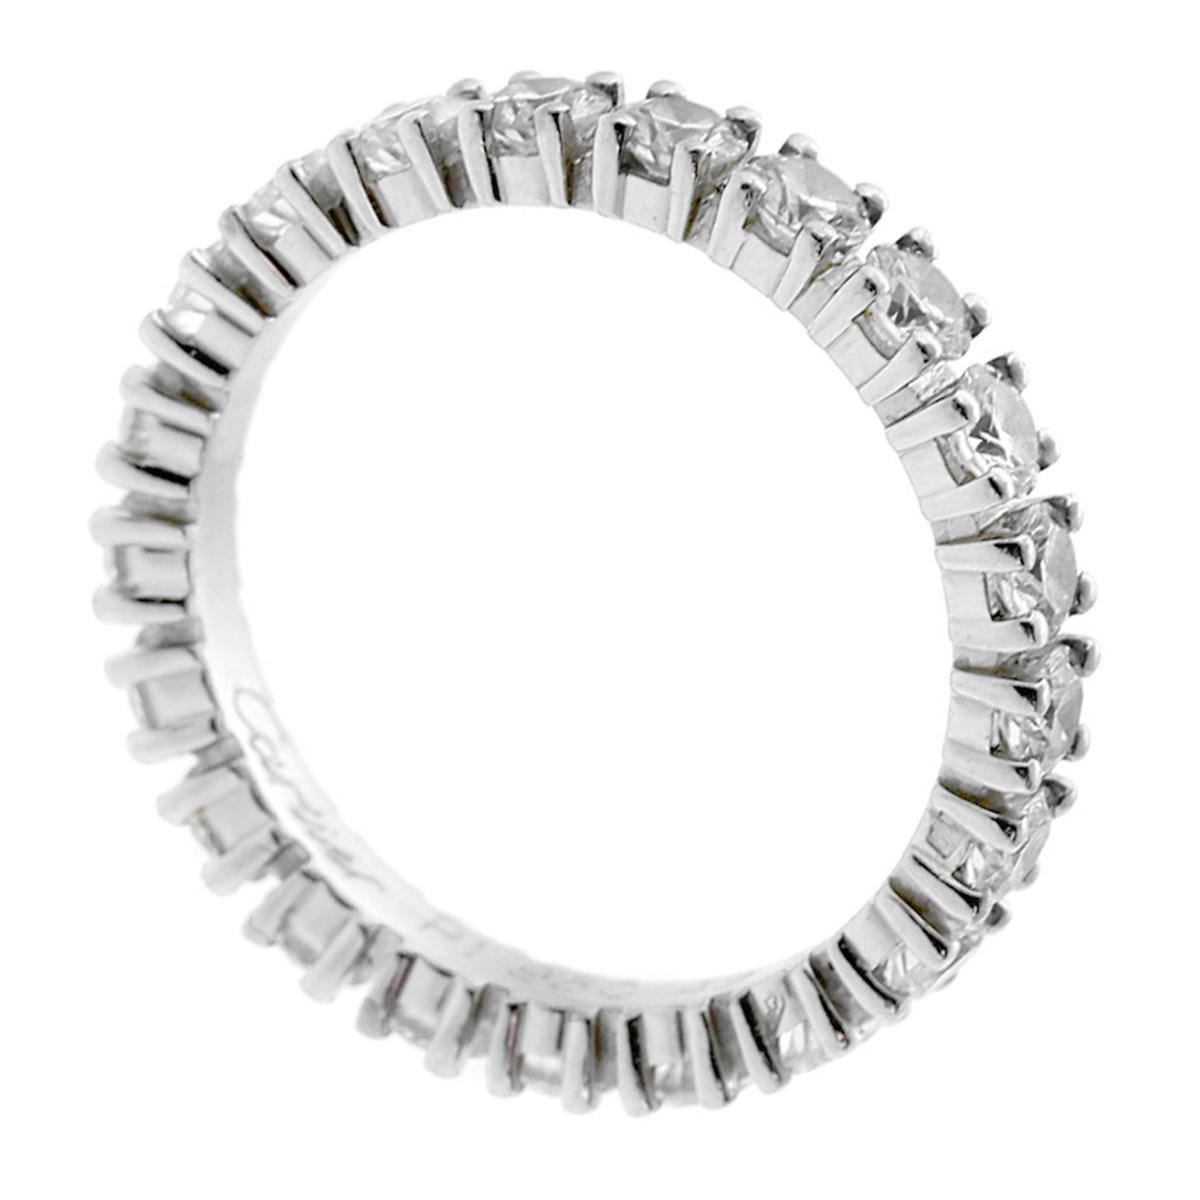 This breathtaking eternity ring from Cartier boasts 1.45 carats of brilliantly cut round diamonds set in platinum; pure Cartier elegance and styling. A curated and eternal band of diamonds, this ring exudes elegance and refined simplicity. Paired